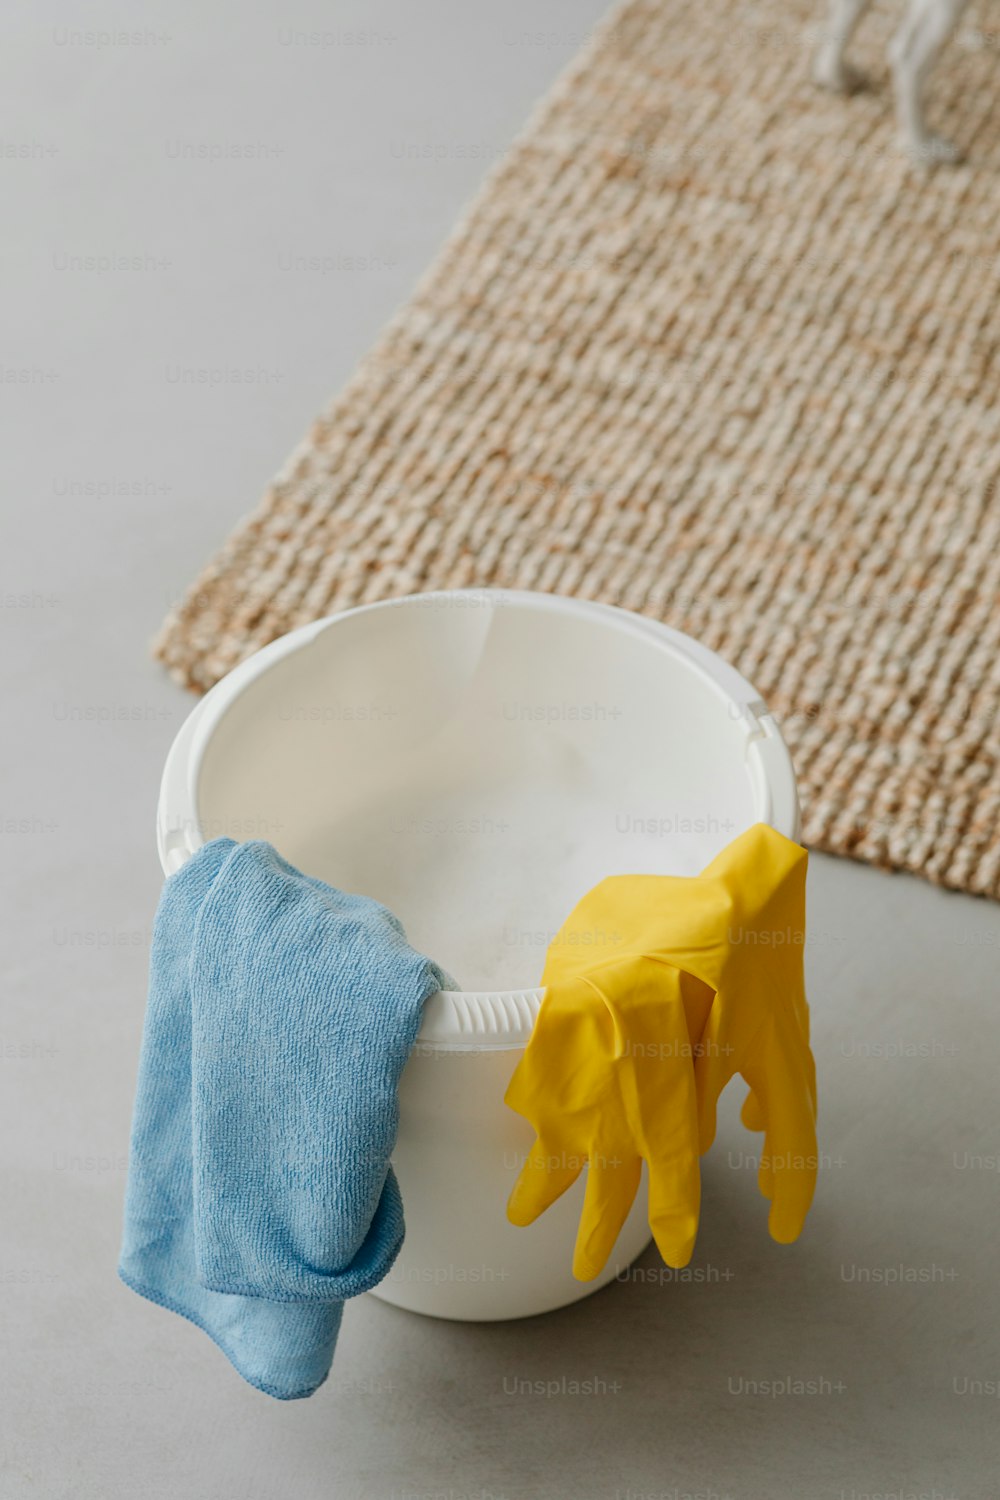 a pair of yellow gloves and a blue cloth in a white bowl